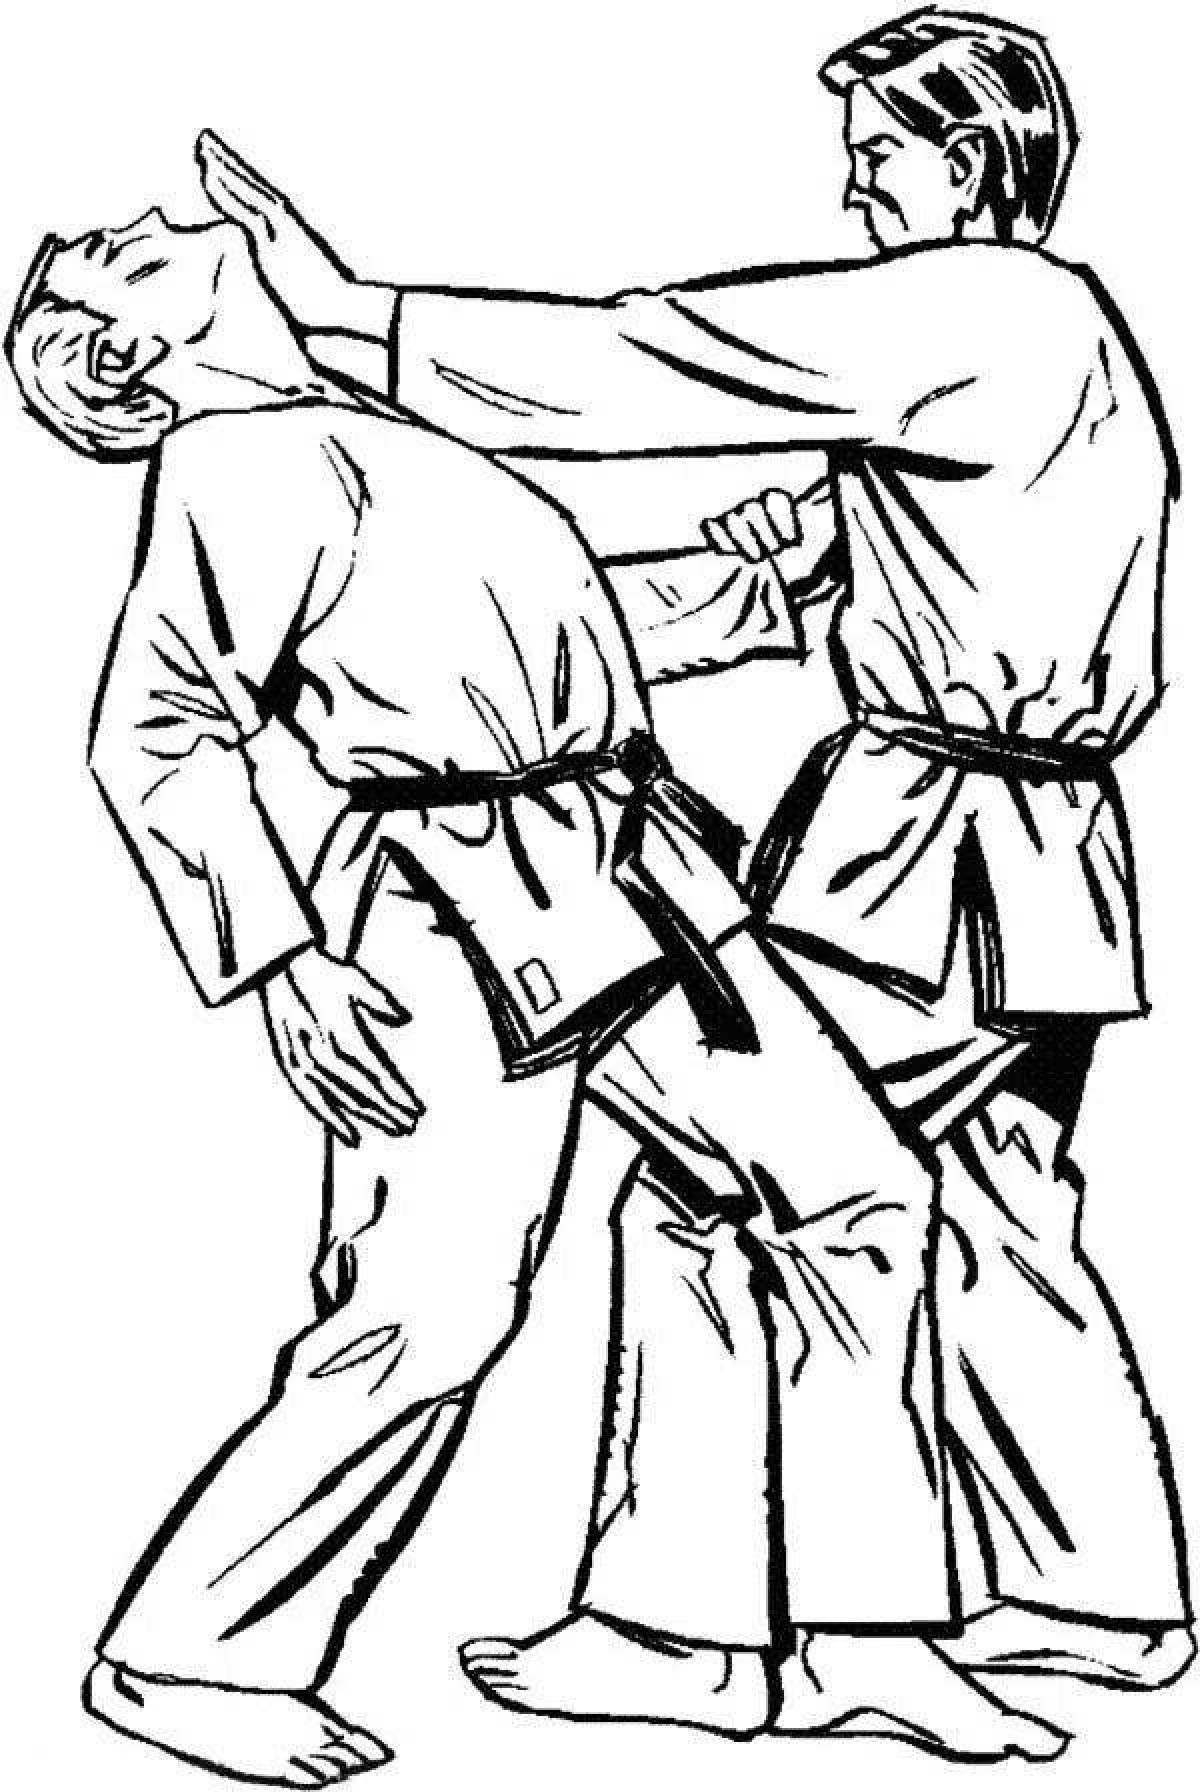 Creative aikido coloring page